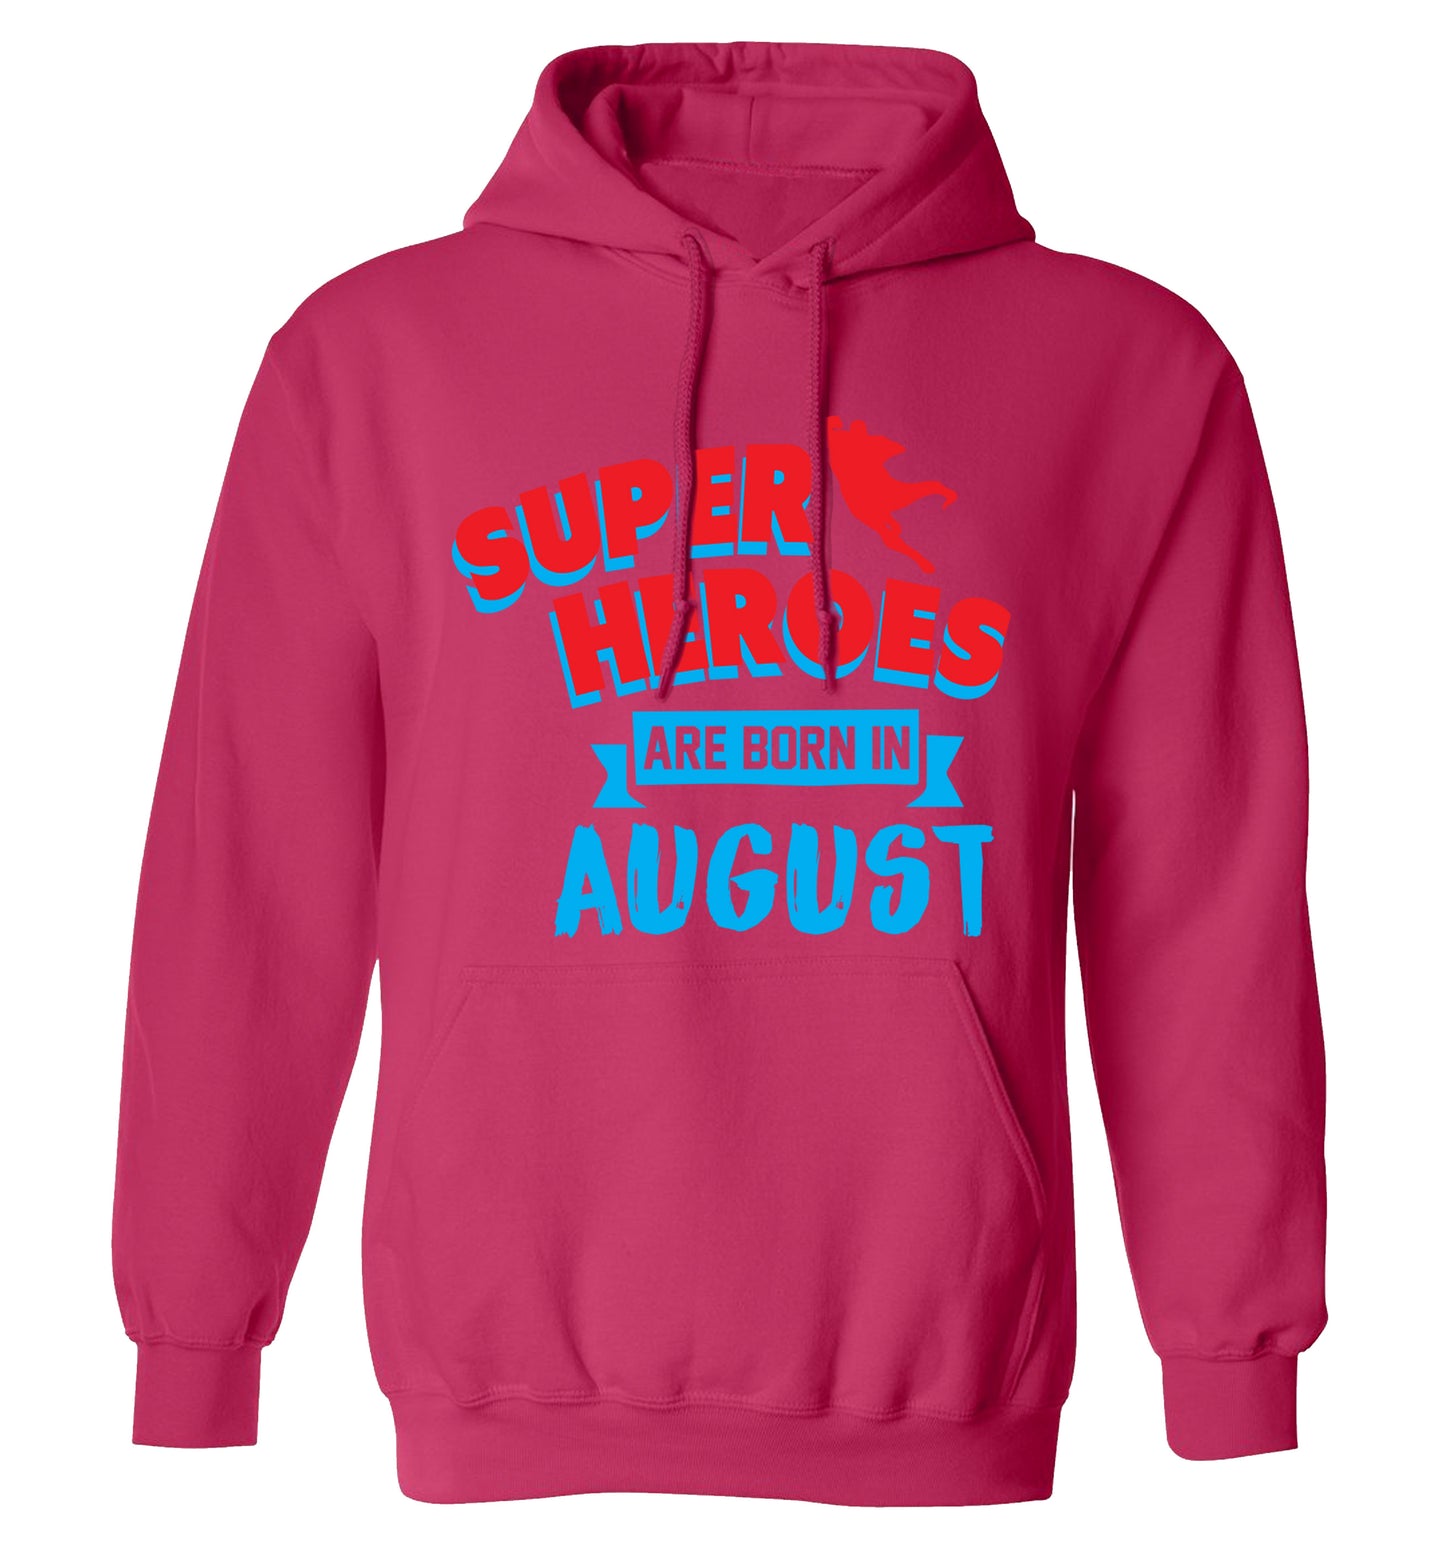 Superheroes are born in August adults unisex pink hoodie 2XL